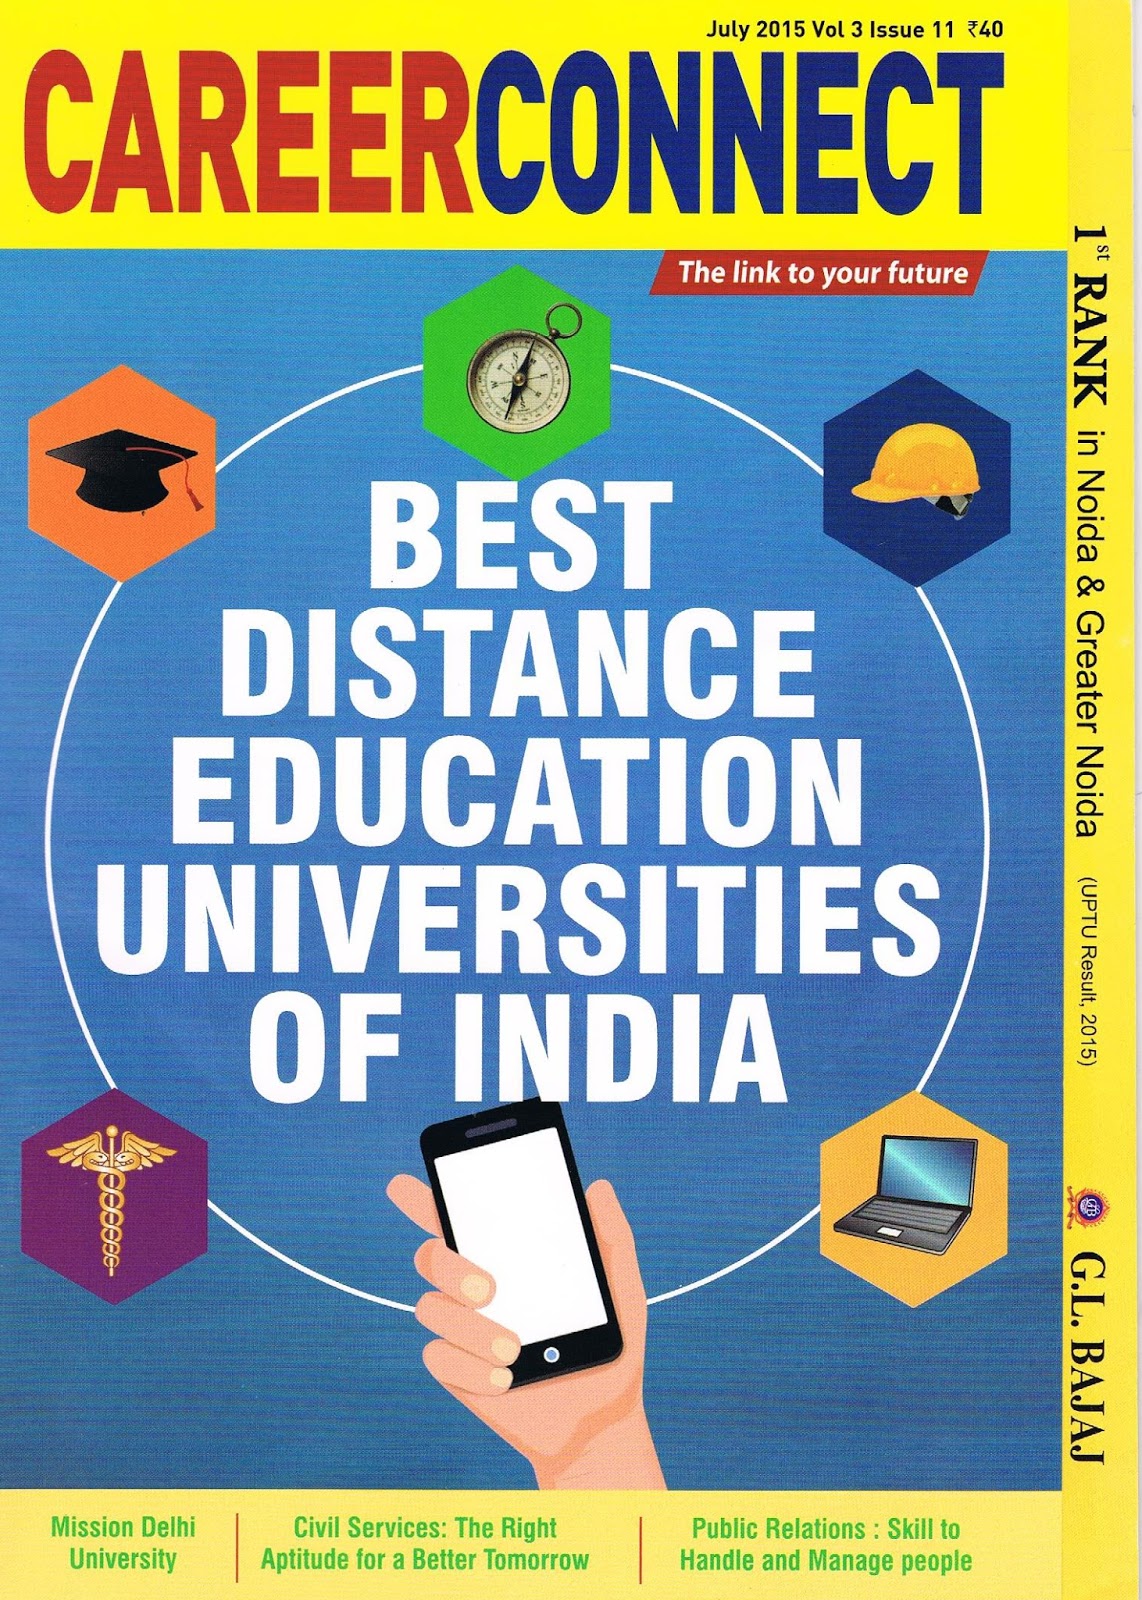 lovely-professional-university-ranked-3rd-among-india-s-top-universities-offering-distance-education